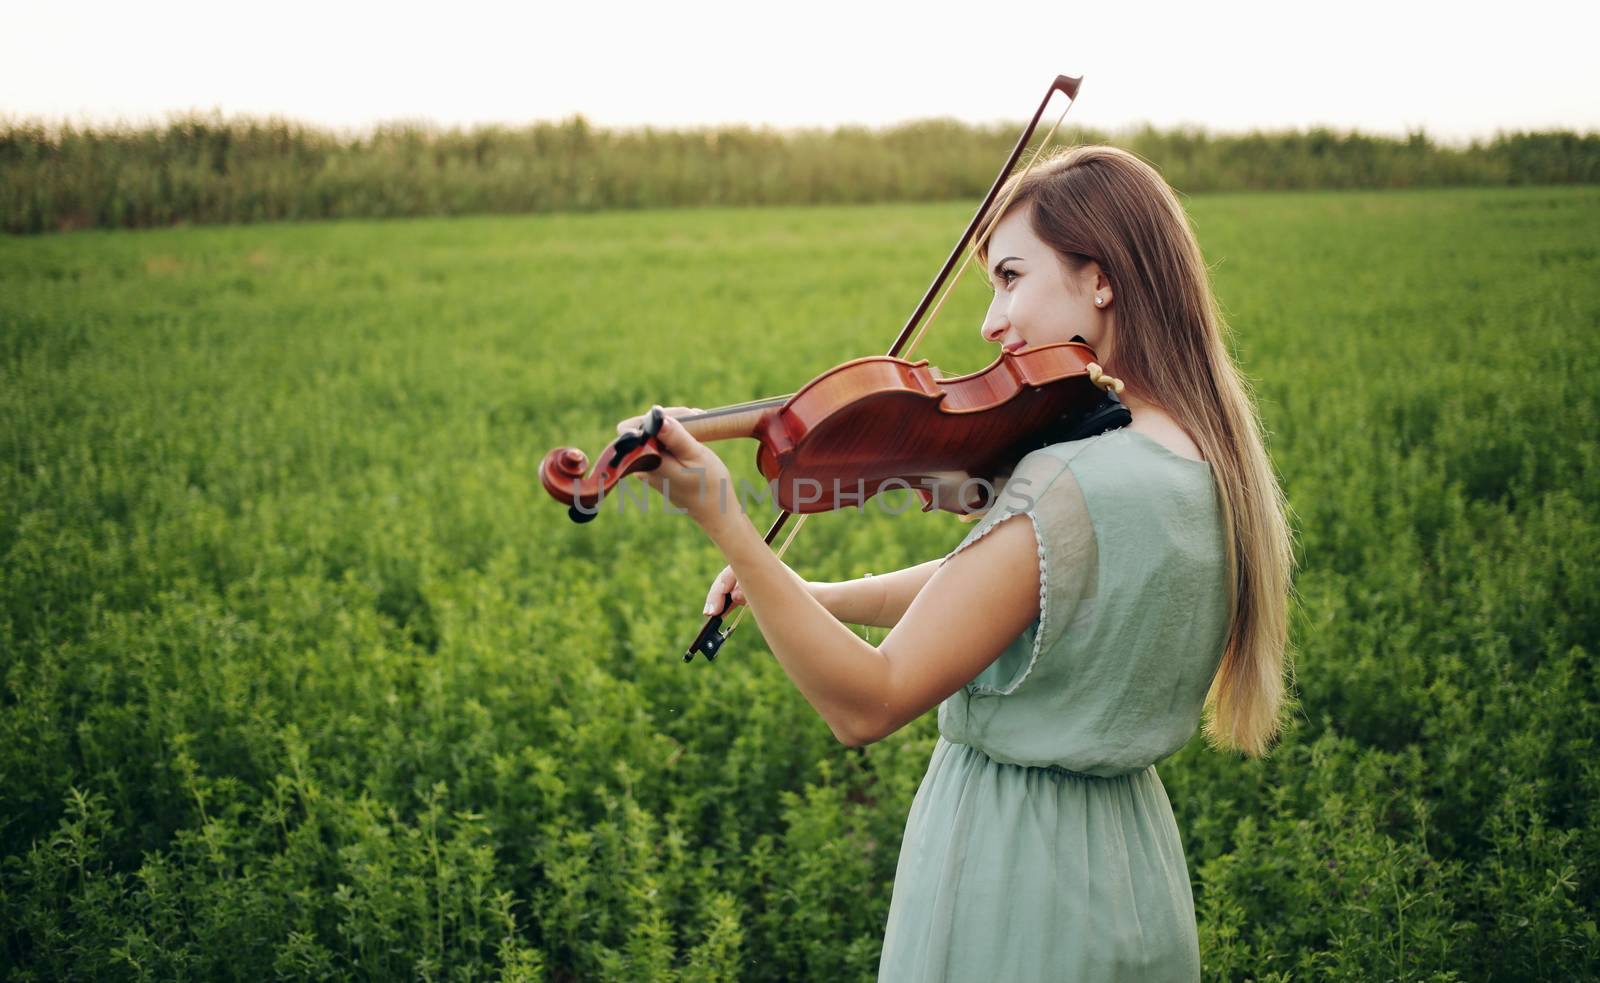 Romantic woman with loose hair playing the violin. Sunset light in nature. Violin training